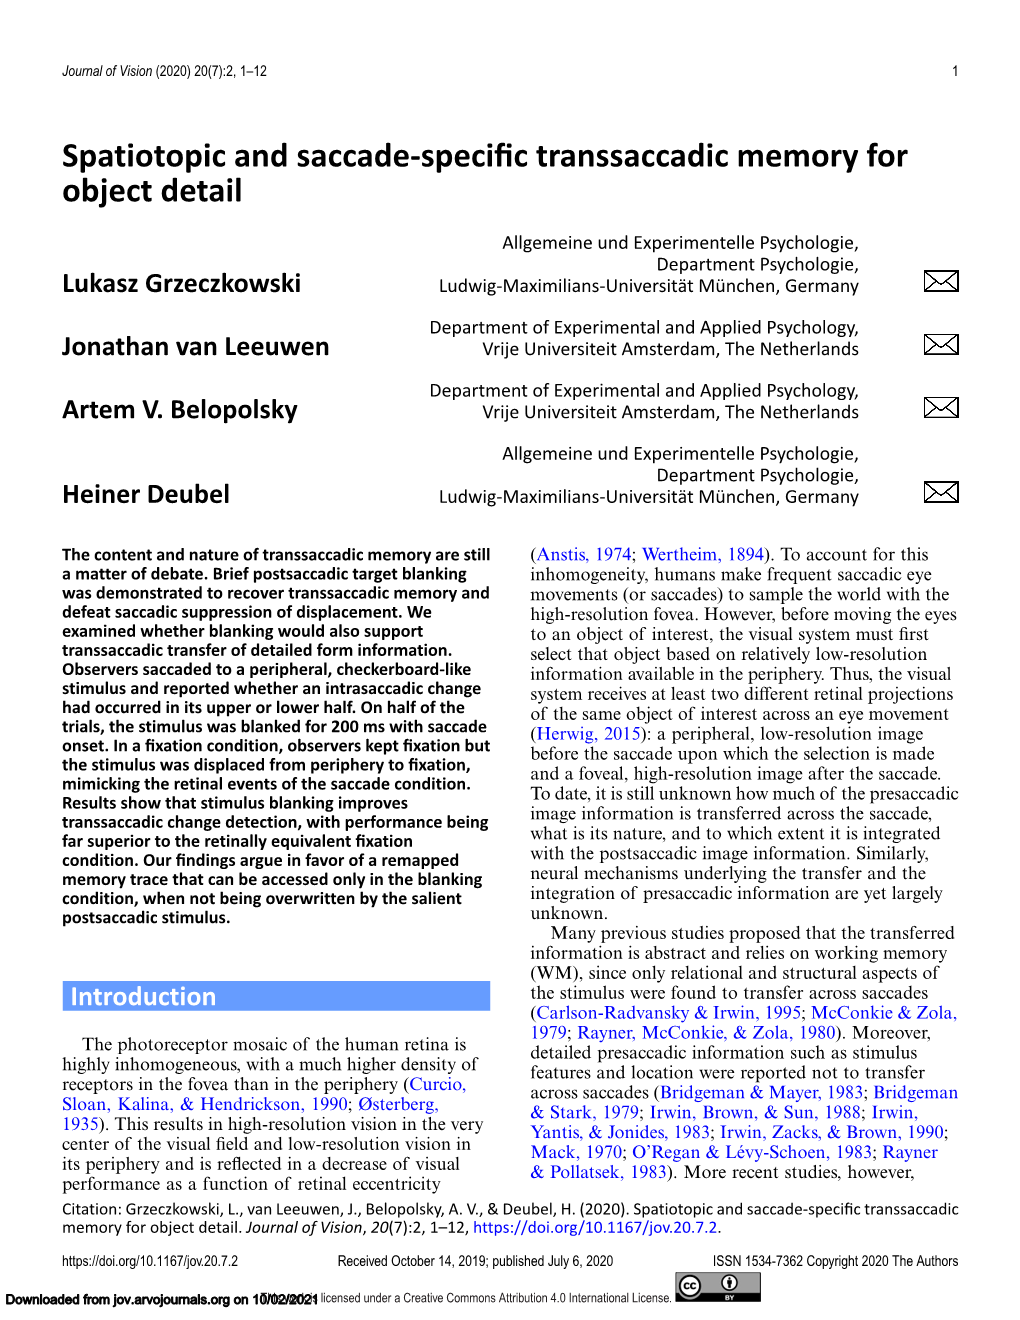 Spatiotopic and Saccade-Specific Transsaccadic Memory for Object